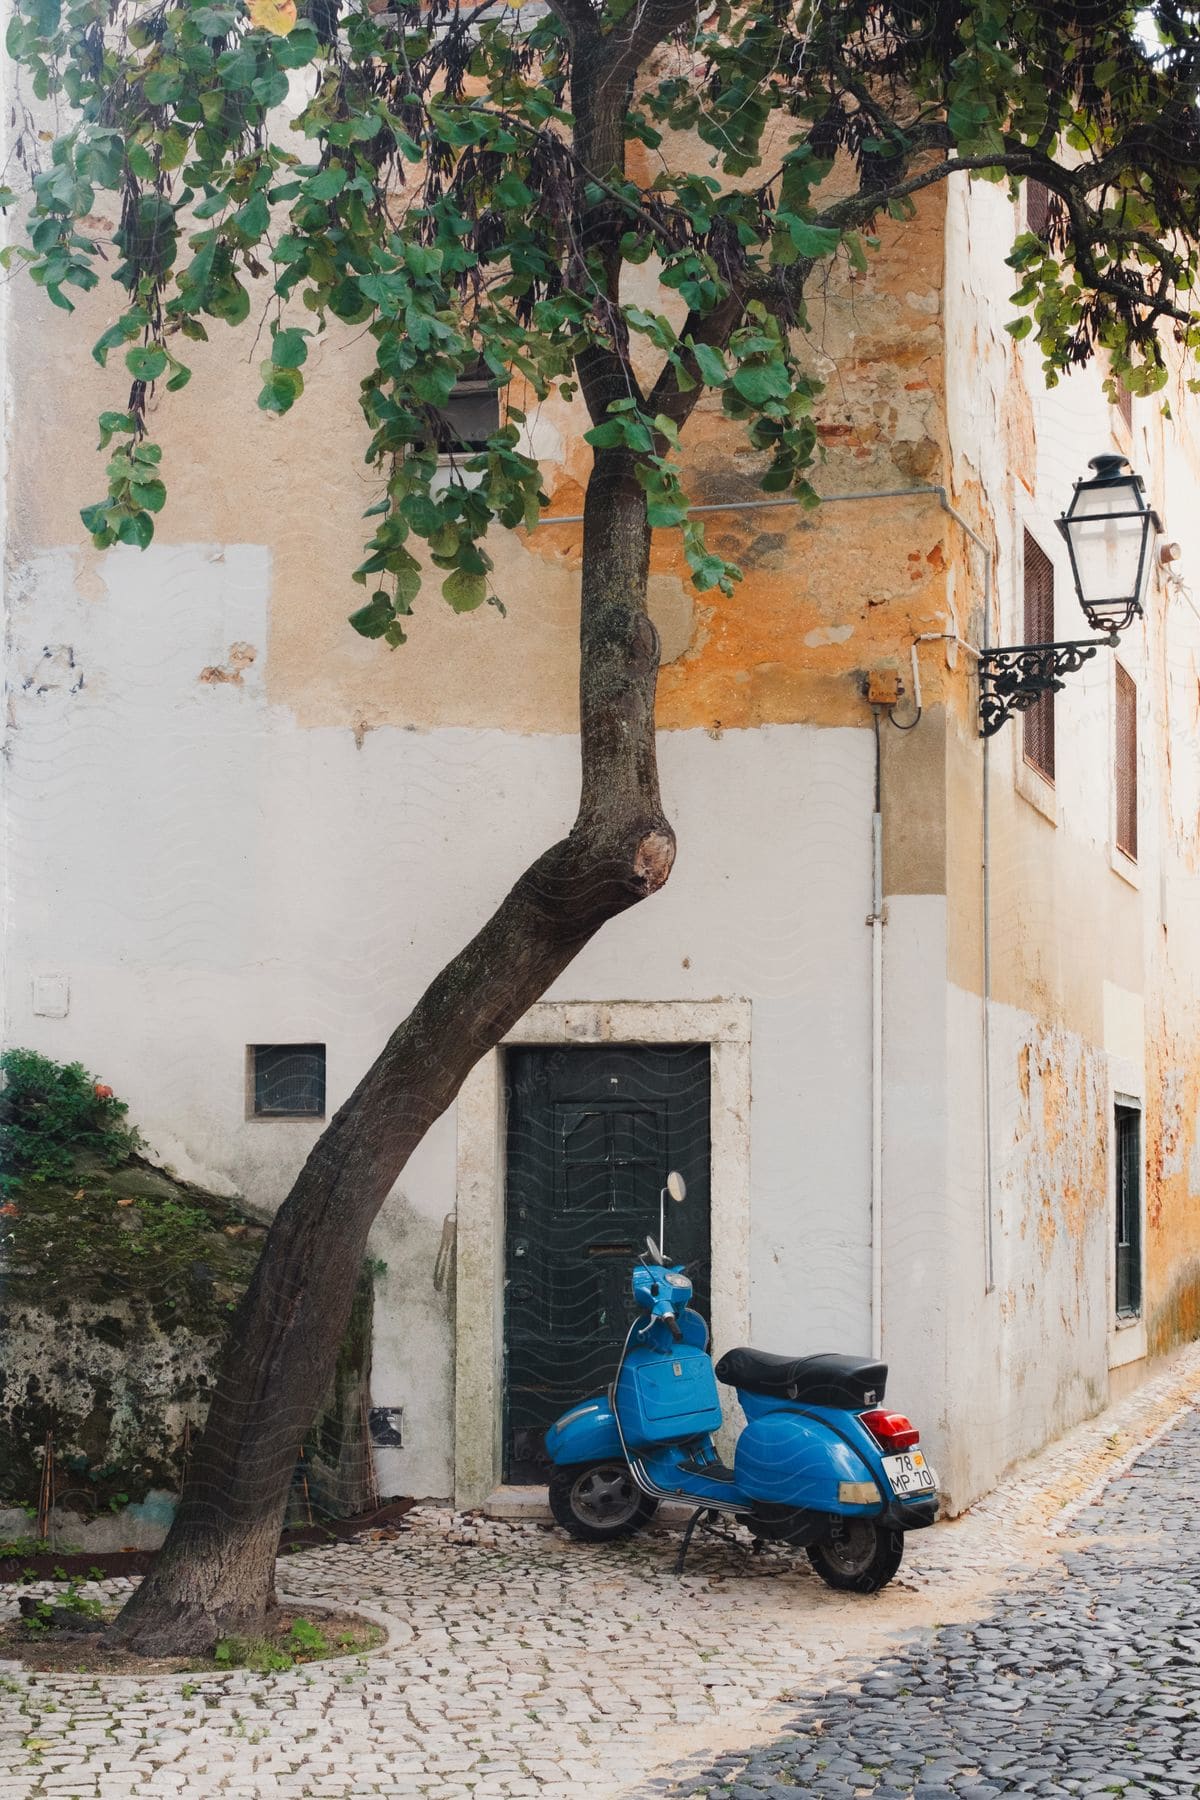 A blue moped neatly parked near a building on the street.